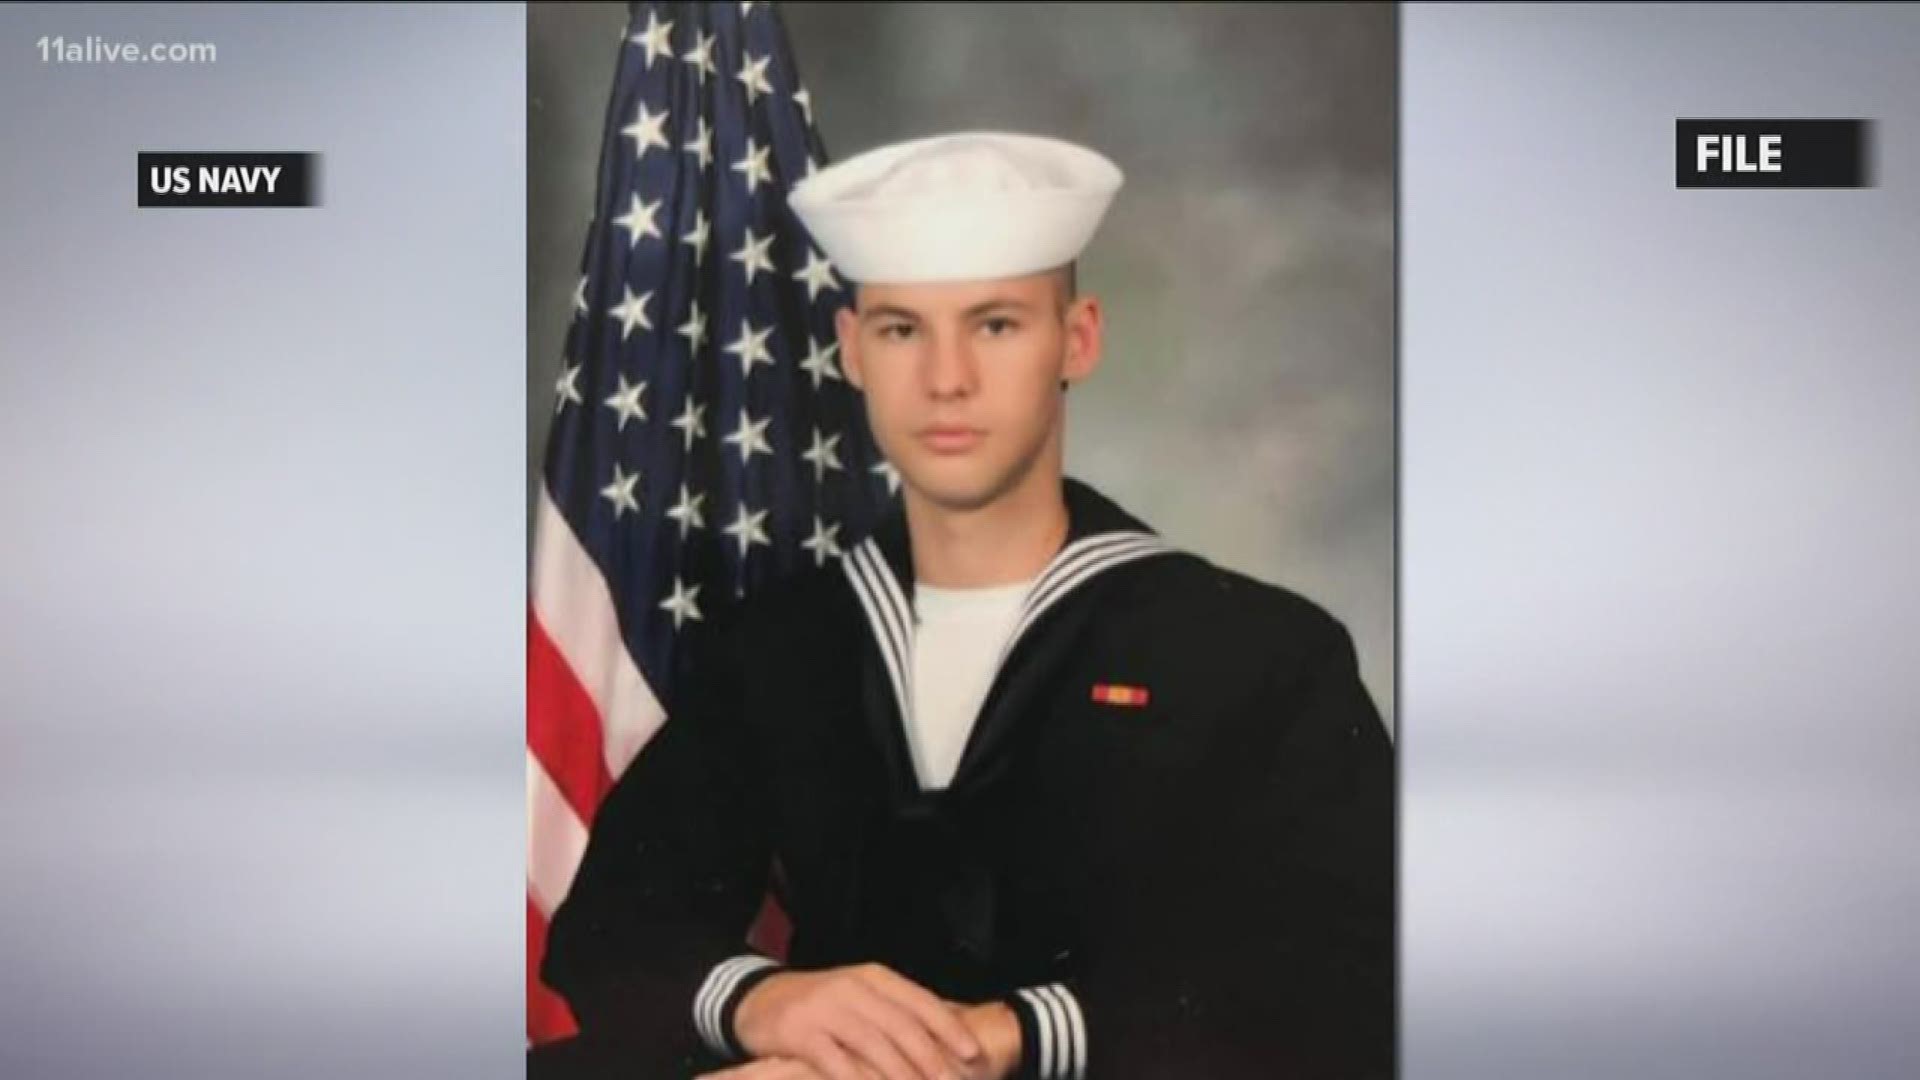 Cameron Walters and two other sailors died after a member of the Saudi Air Force opened fire in a classroom.